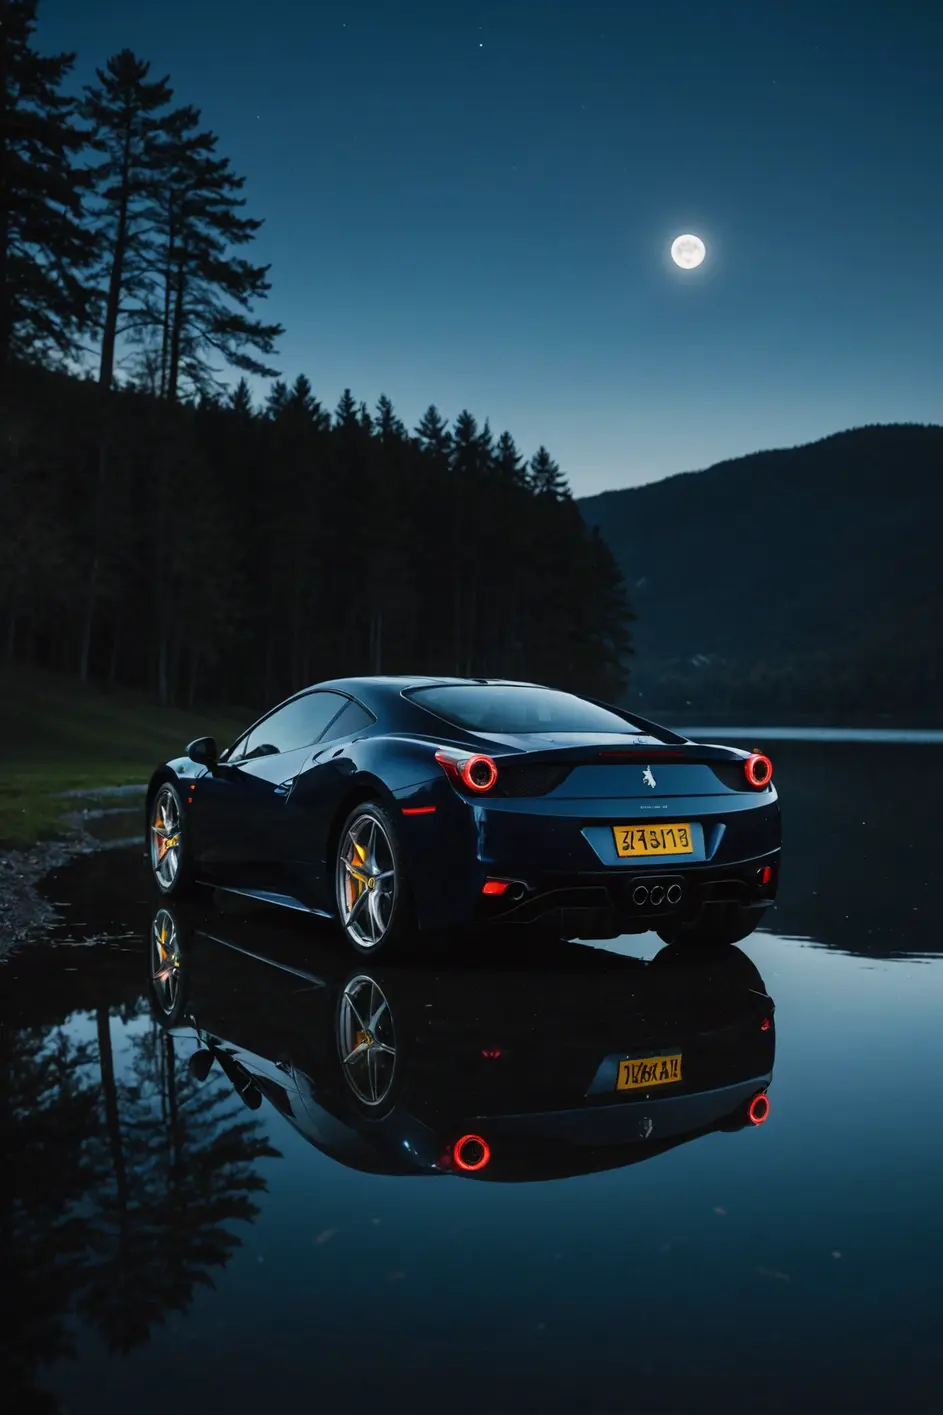 The reflection of a midnight blue sky on the polished black finish of a Ferrari 458 Italia under moonlight, parked beside a quiet lake, moody atmosphere, high contrast, crystal clear reflection, tranquil scene, ambient lighting